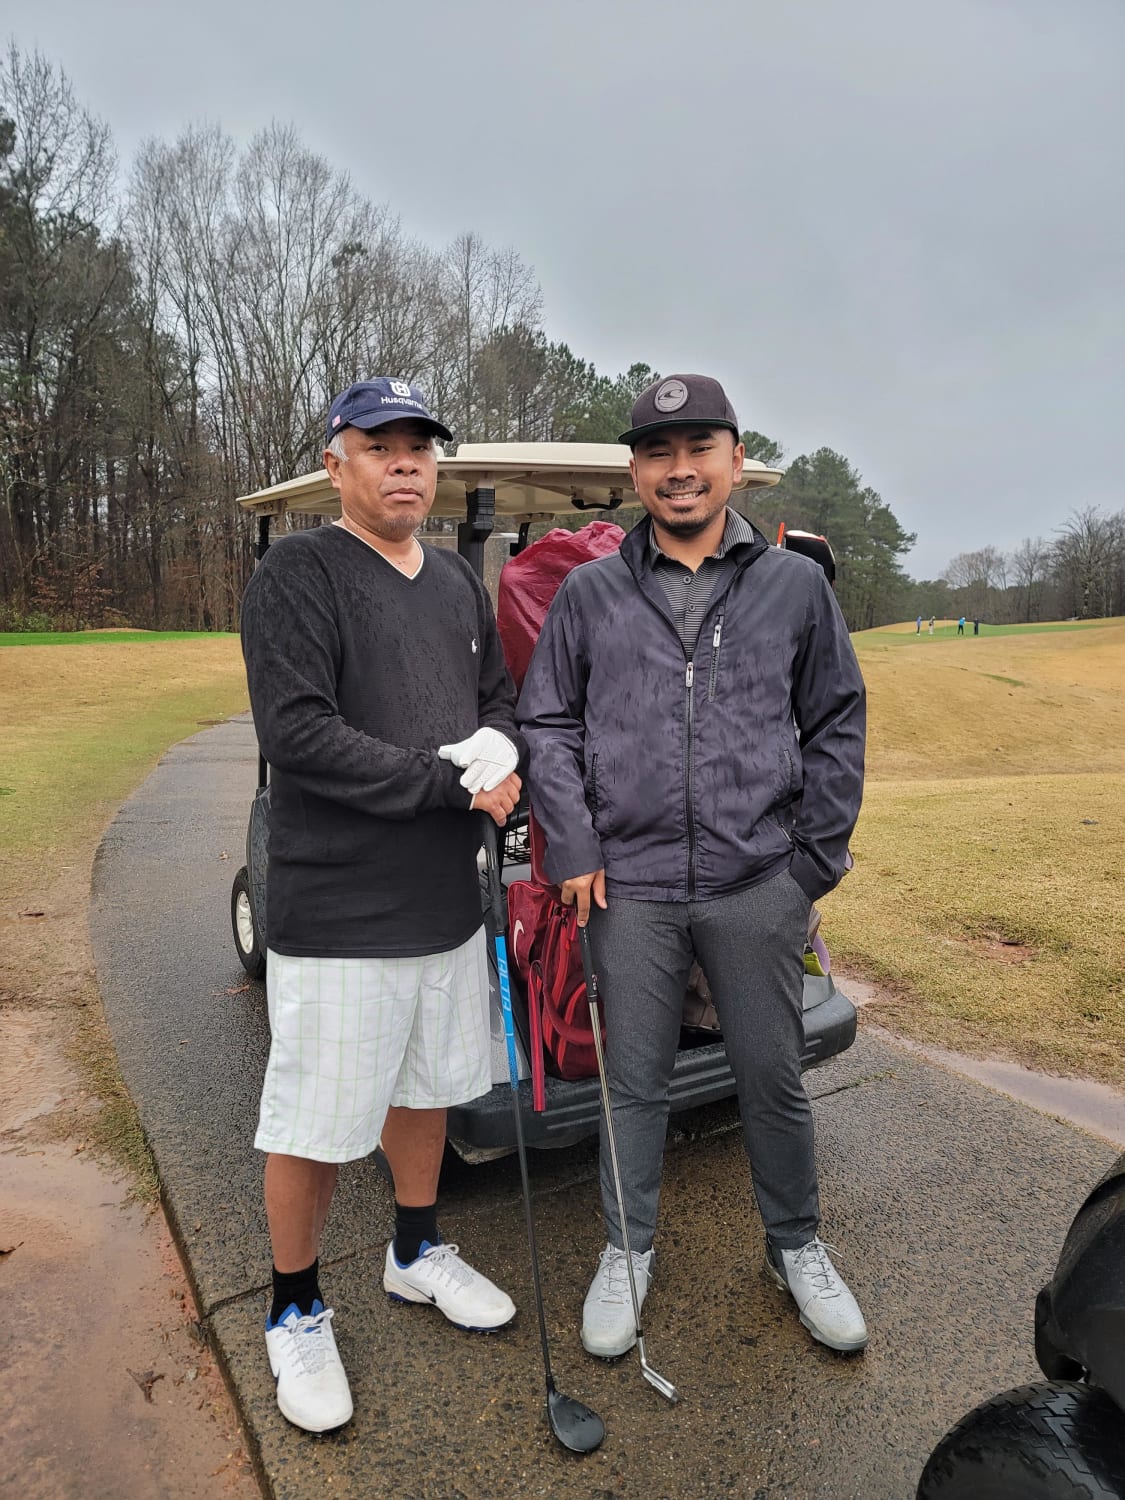 My dad got covid in June 2021. Was in the hospital for total 3 months ventilator for 2 months, ECMO for a month, 2 strokes, 90% infection in the lungs, 7 other complications, almost died 4 times and 3 months of rehab. I took a break from golf to wait for him l. Today was our first round together. 🙏